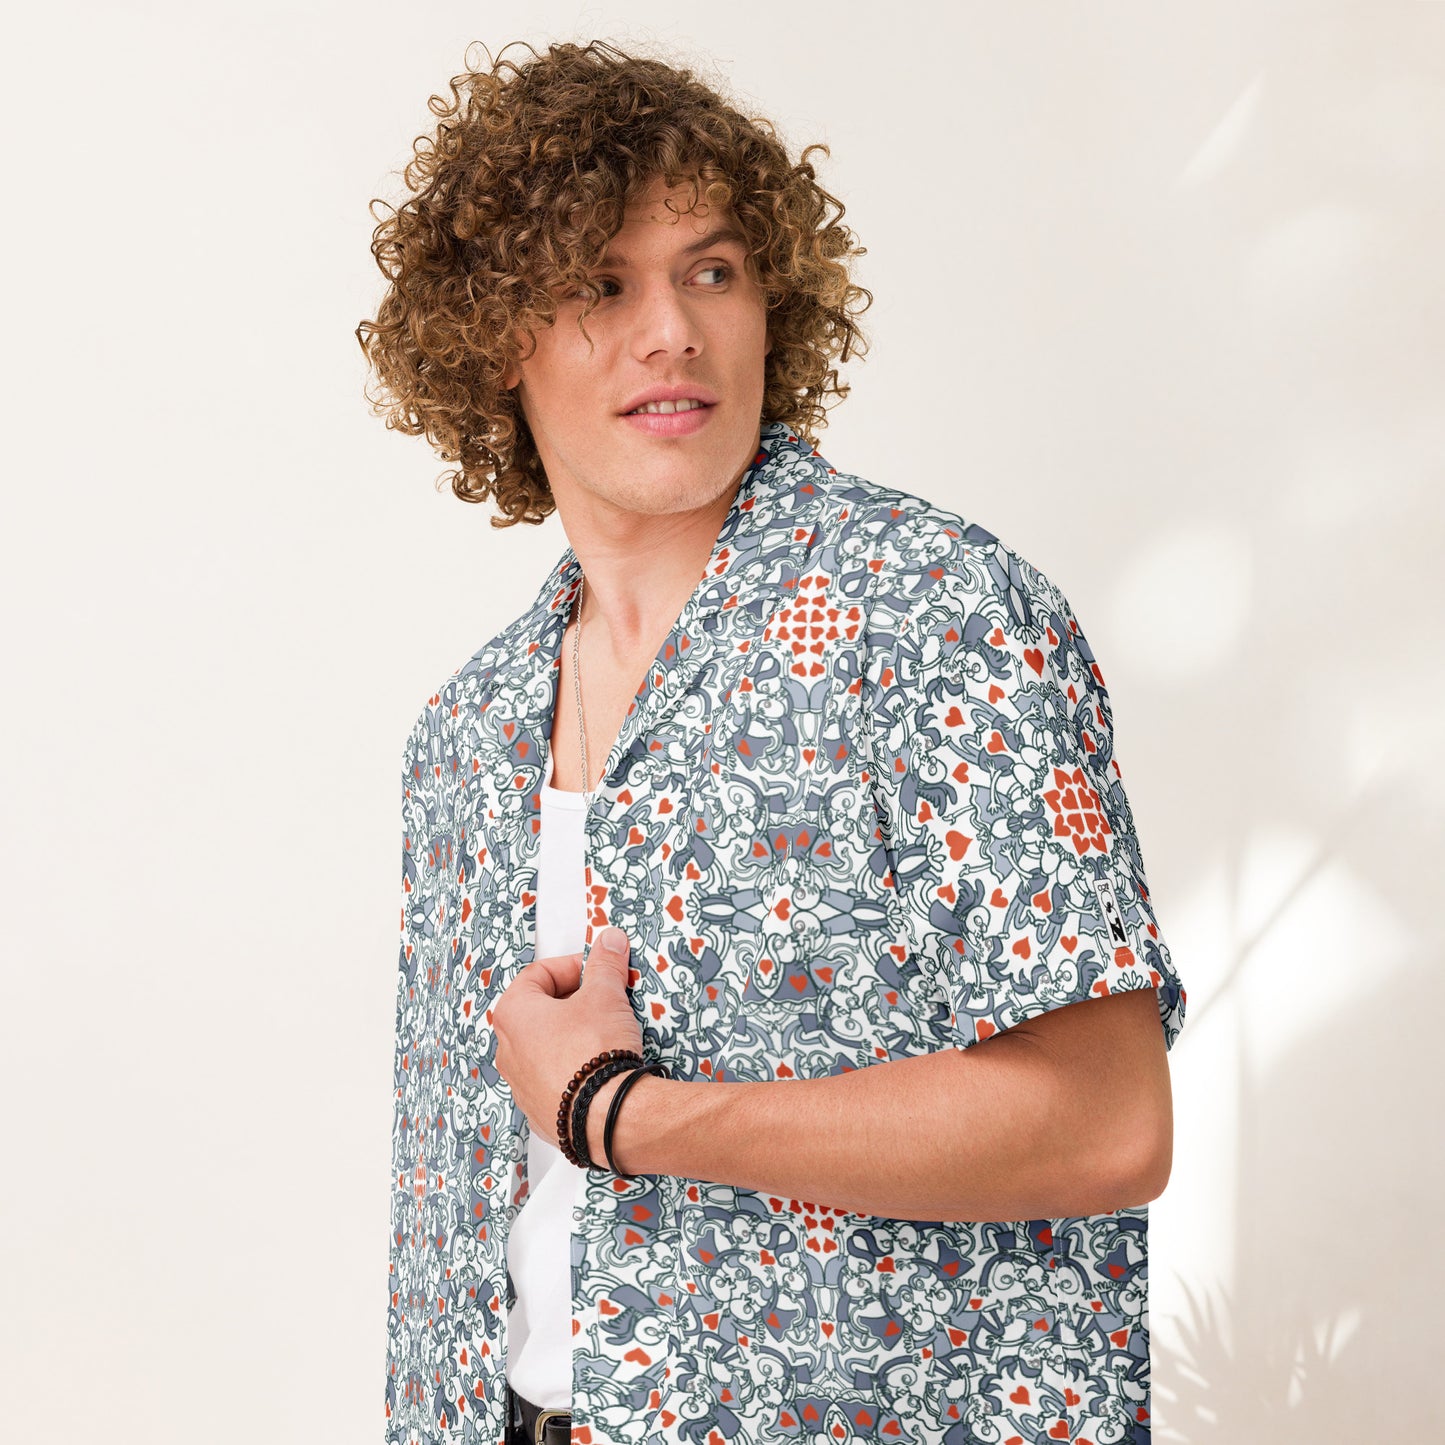 Kissed by Doodles in Valentine's Mandala Melody - Unisex button shirt. Overview